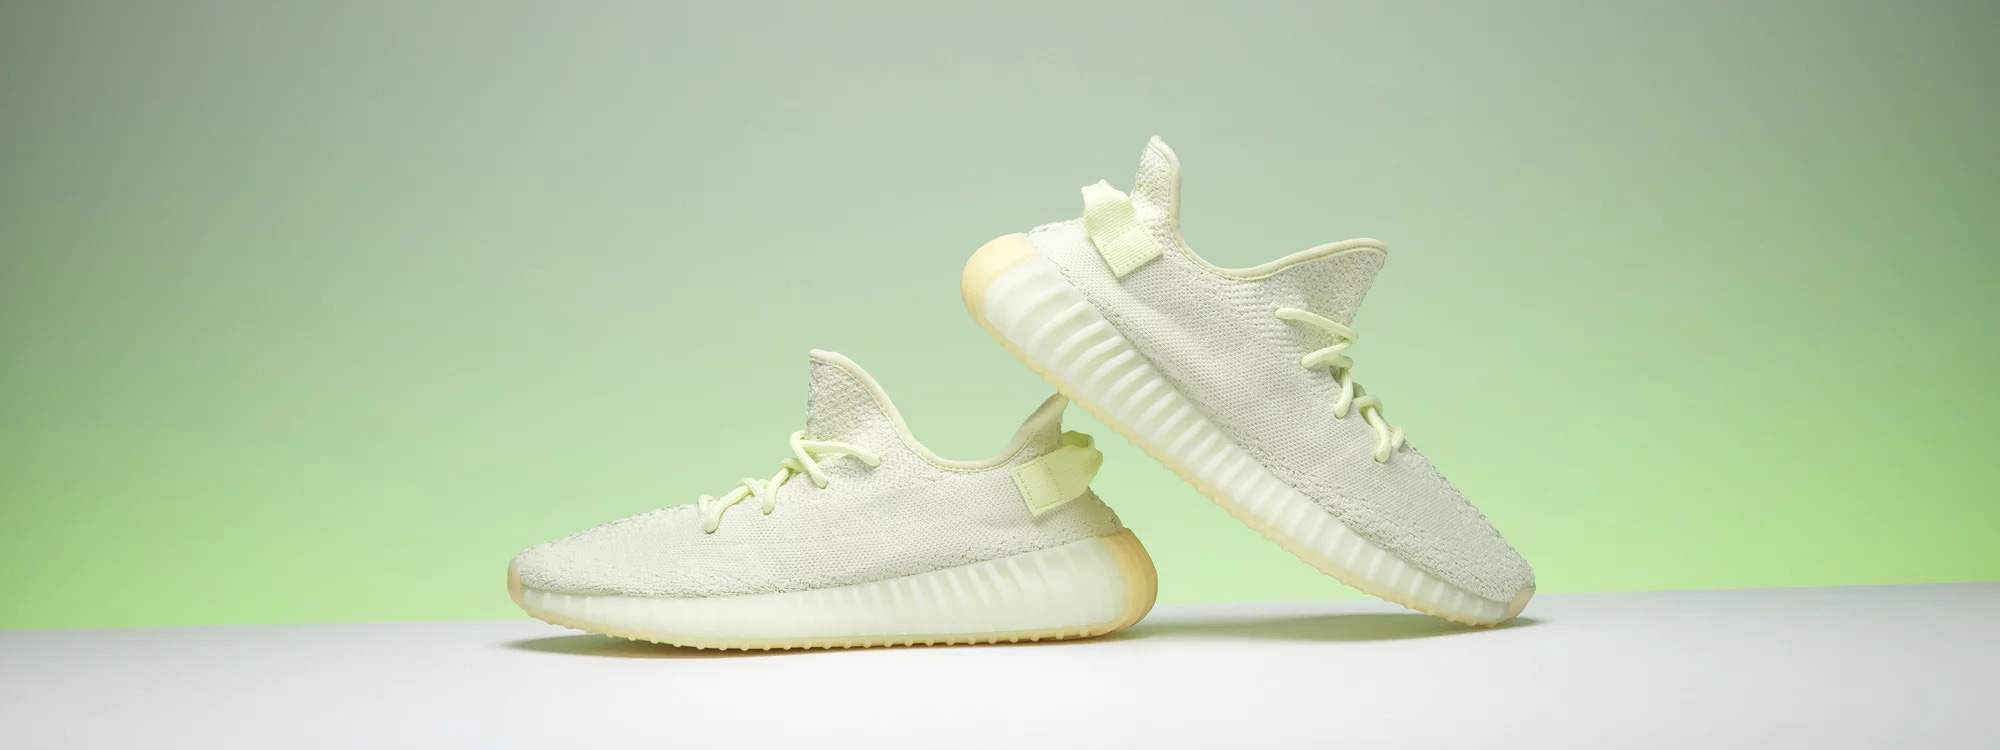 Your size Adidas Yeezy Boost 350 V2 Butter shoes online